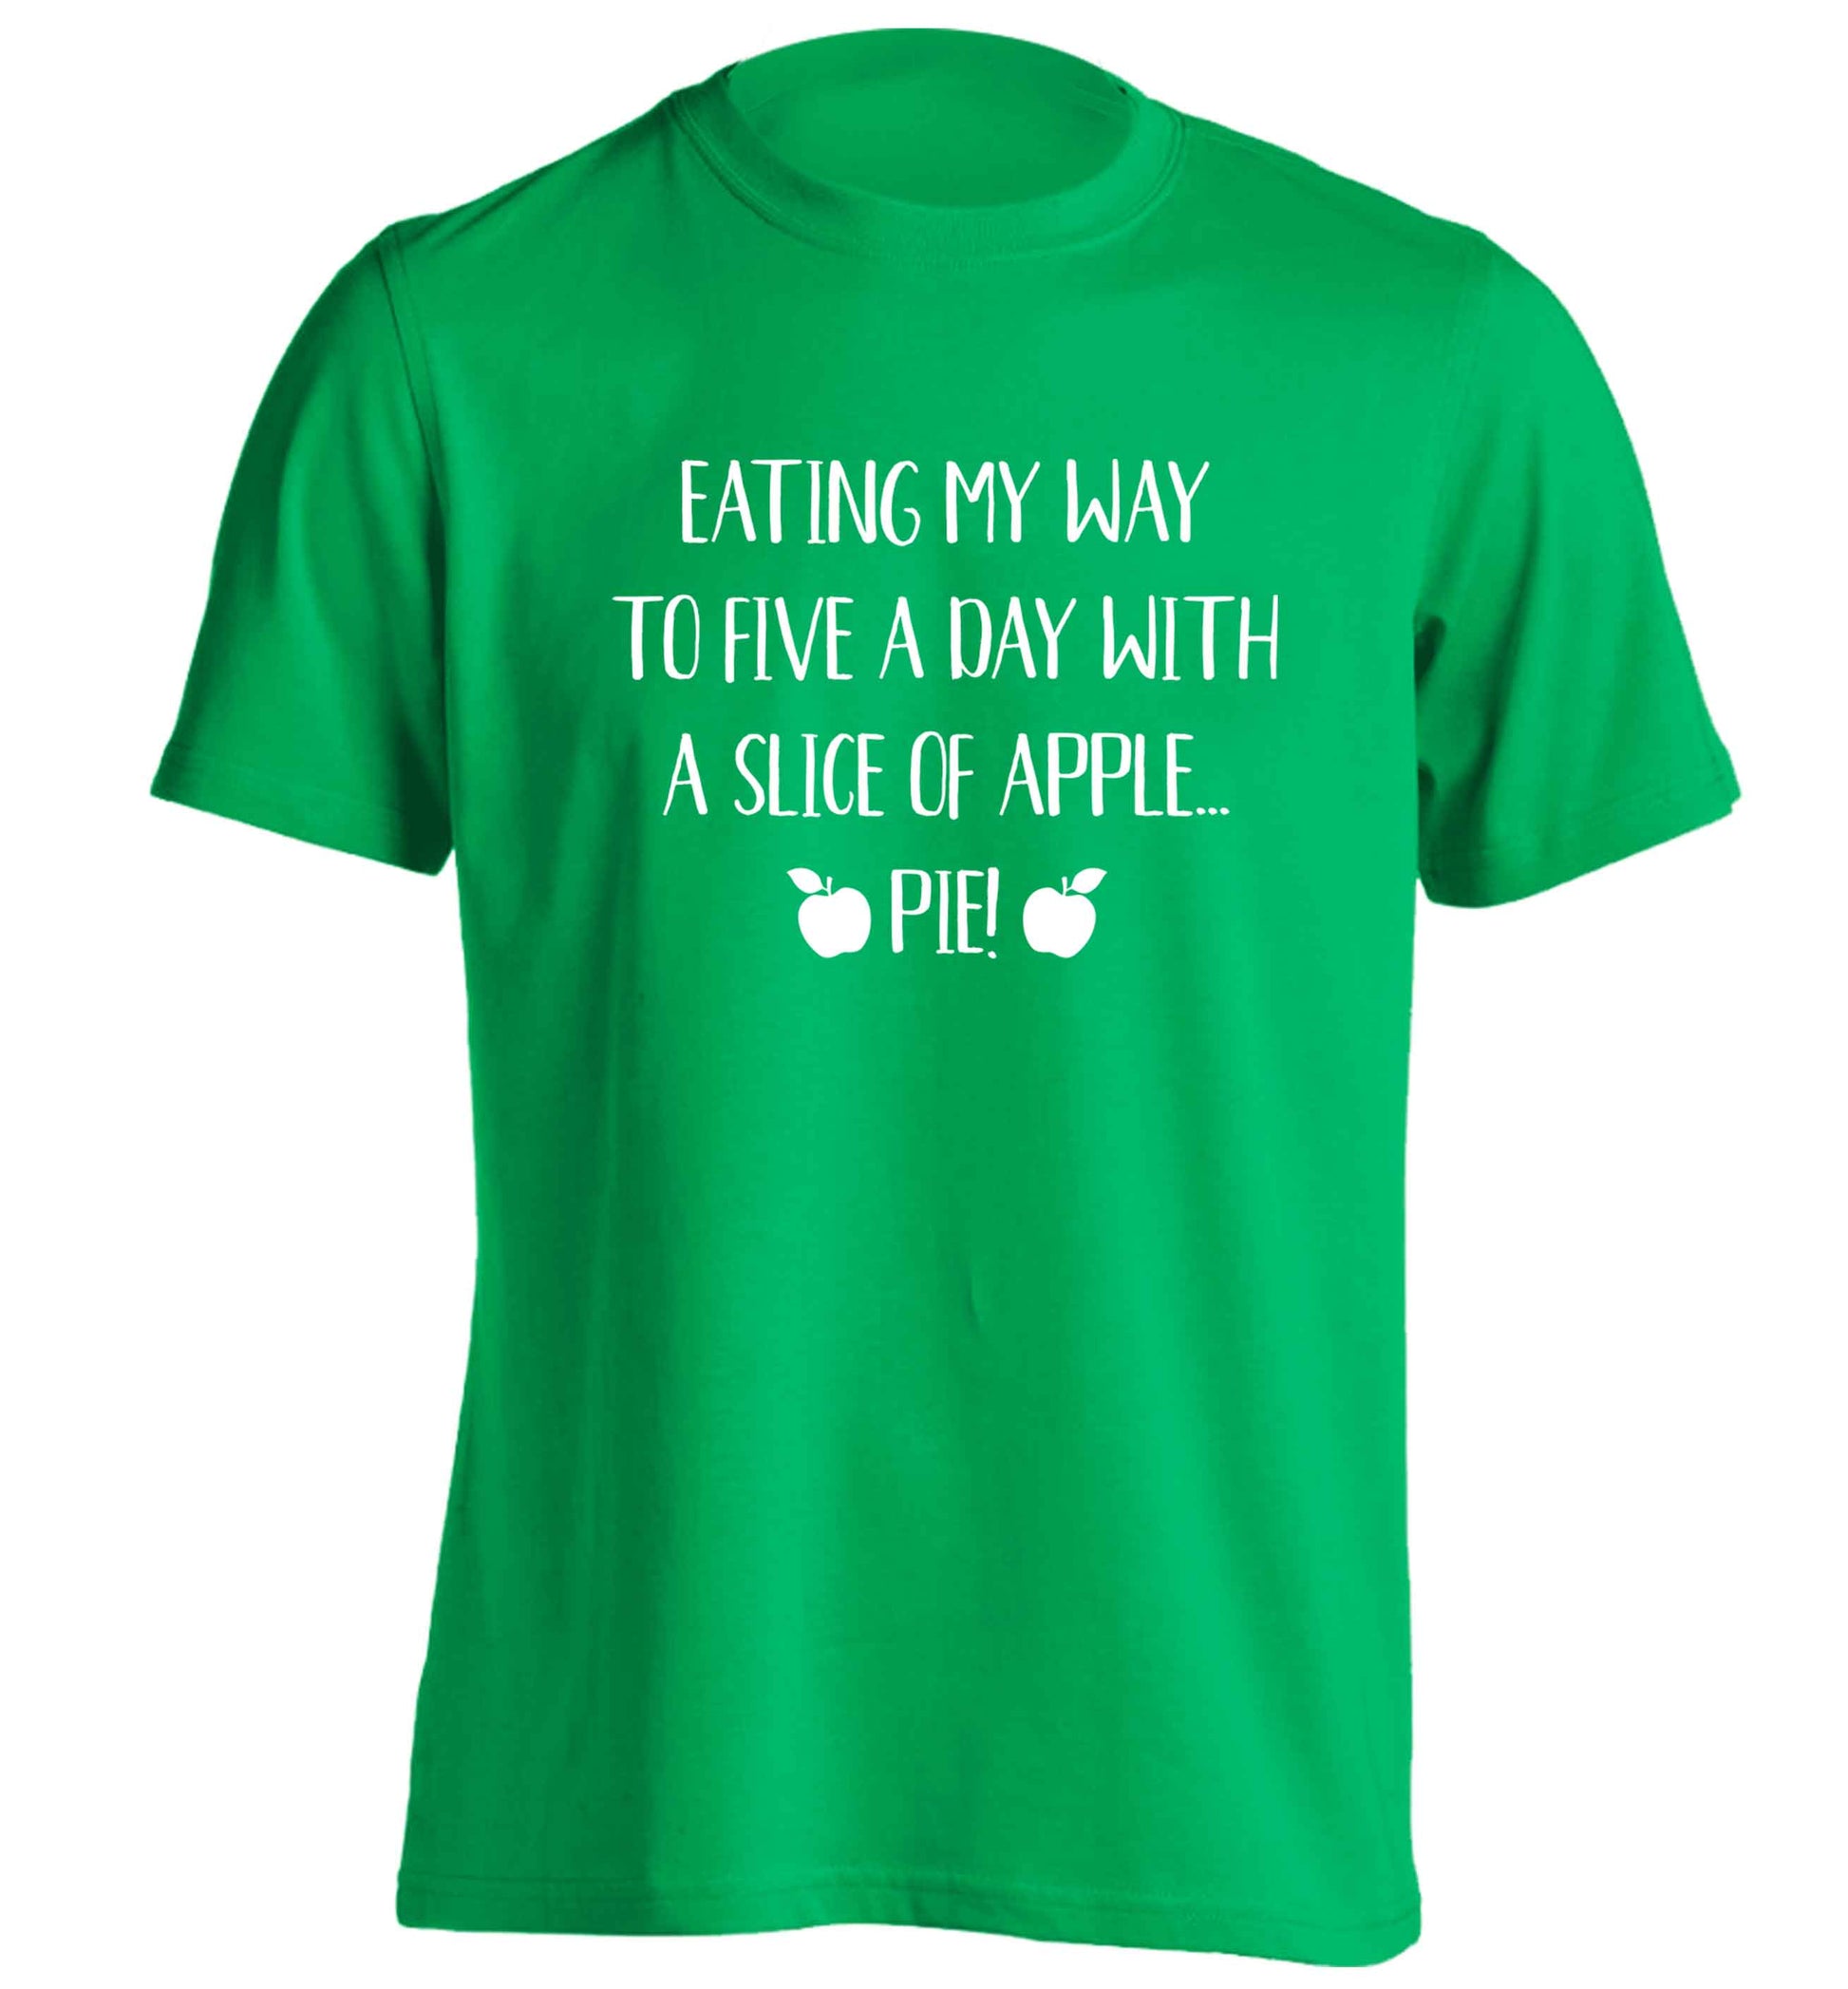 Eating my way to five a day with a slice of apple pie adults unisex green Tshirt 2XL